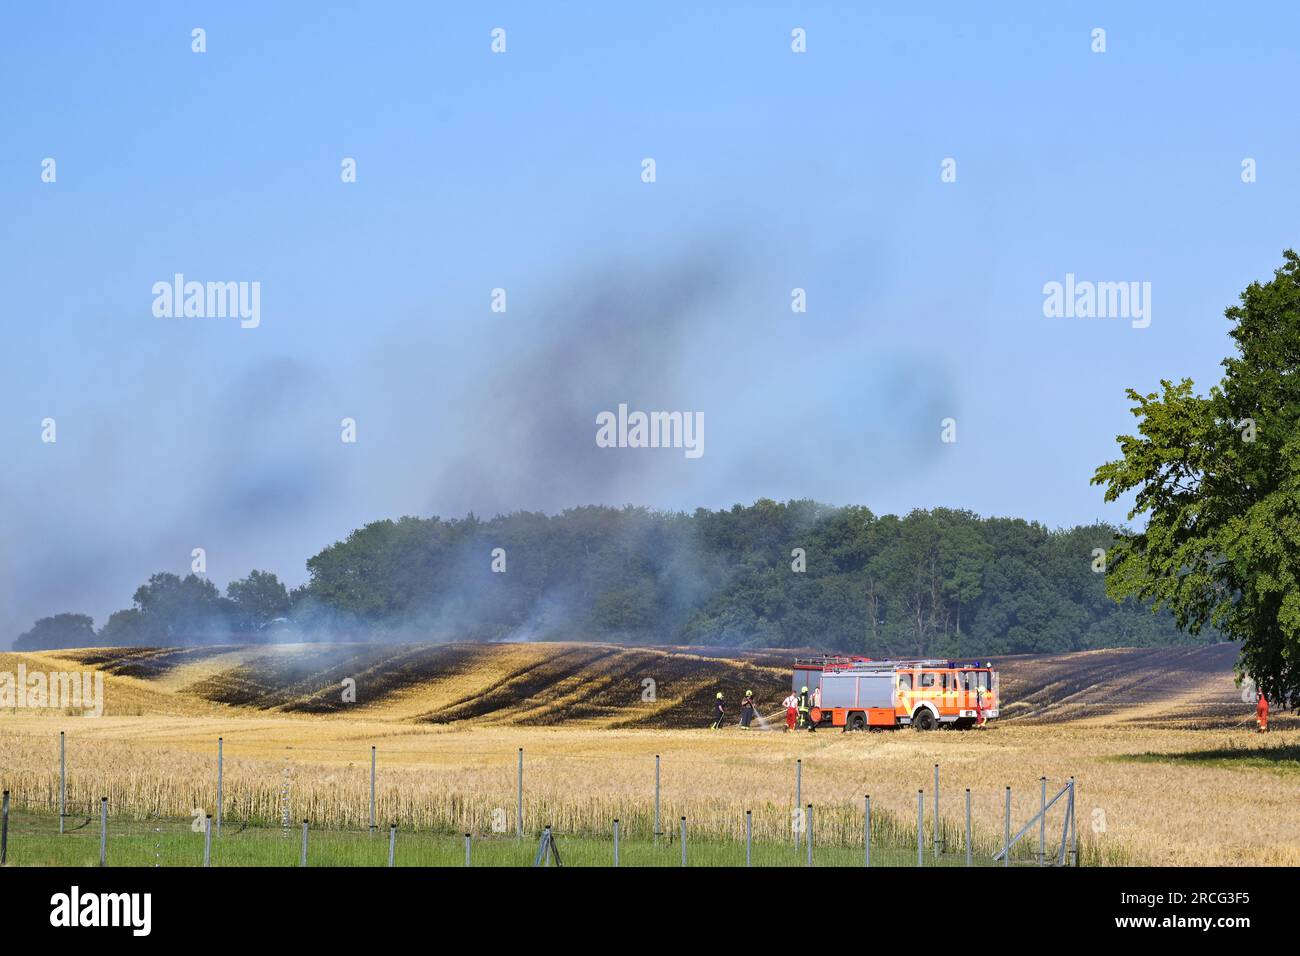 Fire engine and firefighters damping down a field fire to protect the surrounding area in a rural landscape, copy space, selected focus Stock Photo